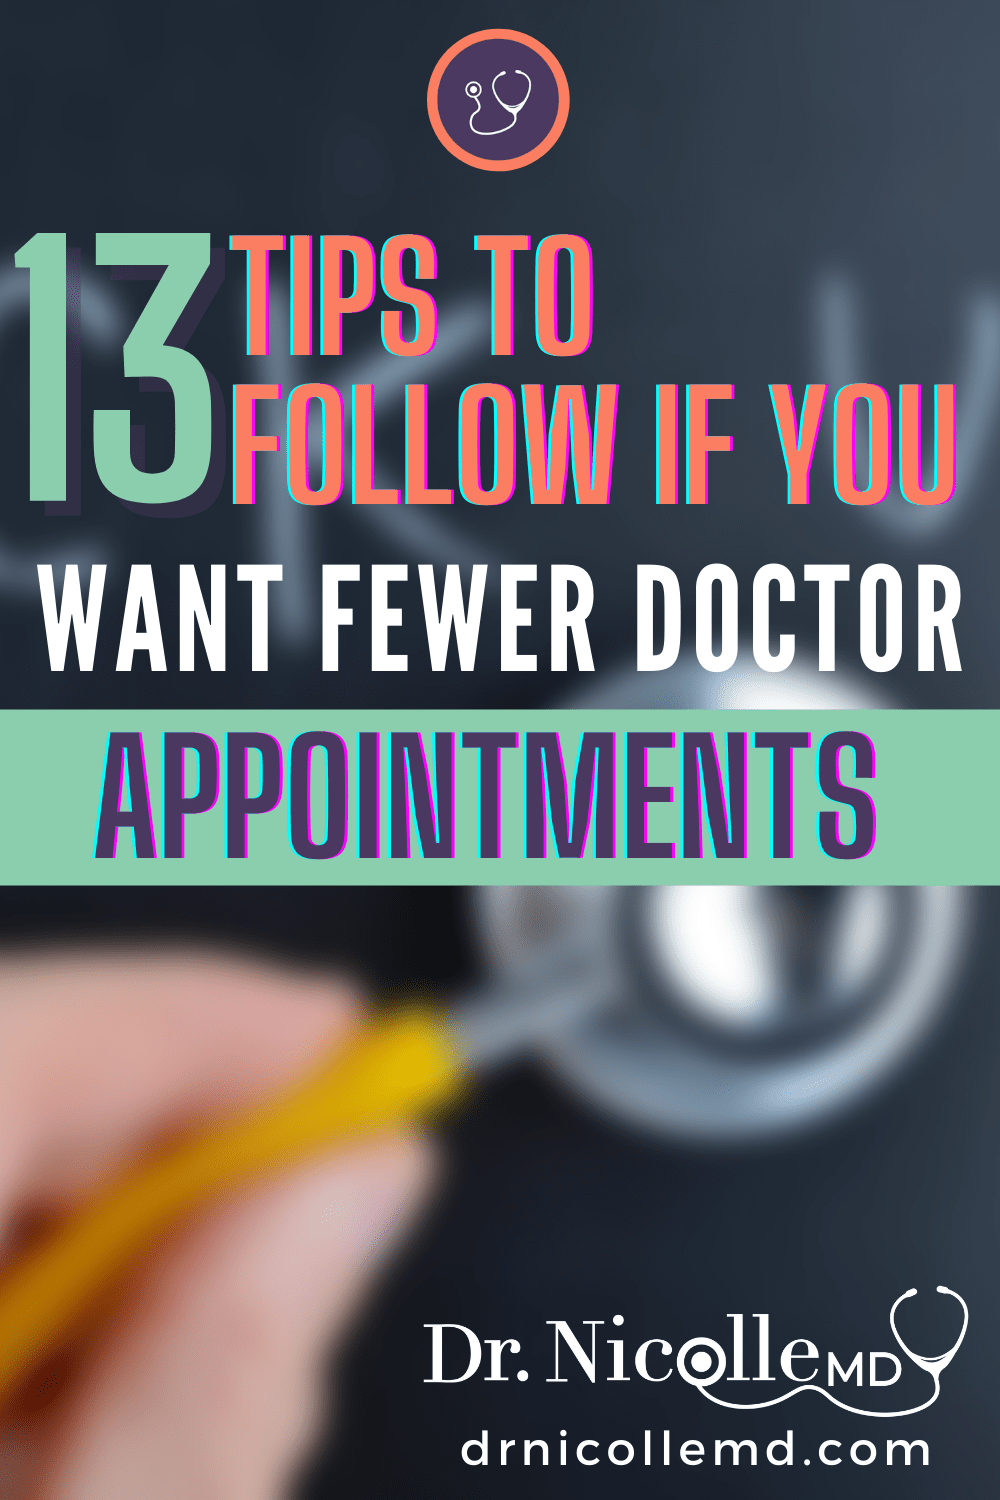 13 Tips to Follow If You Want Fewer Doctor Appointments